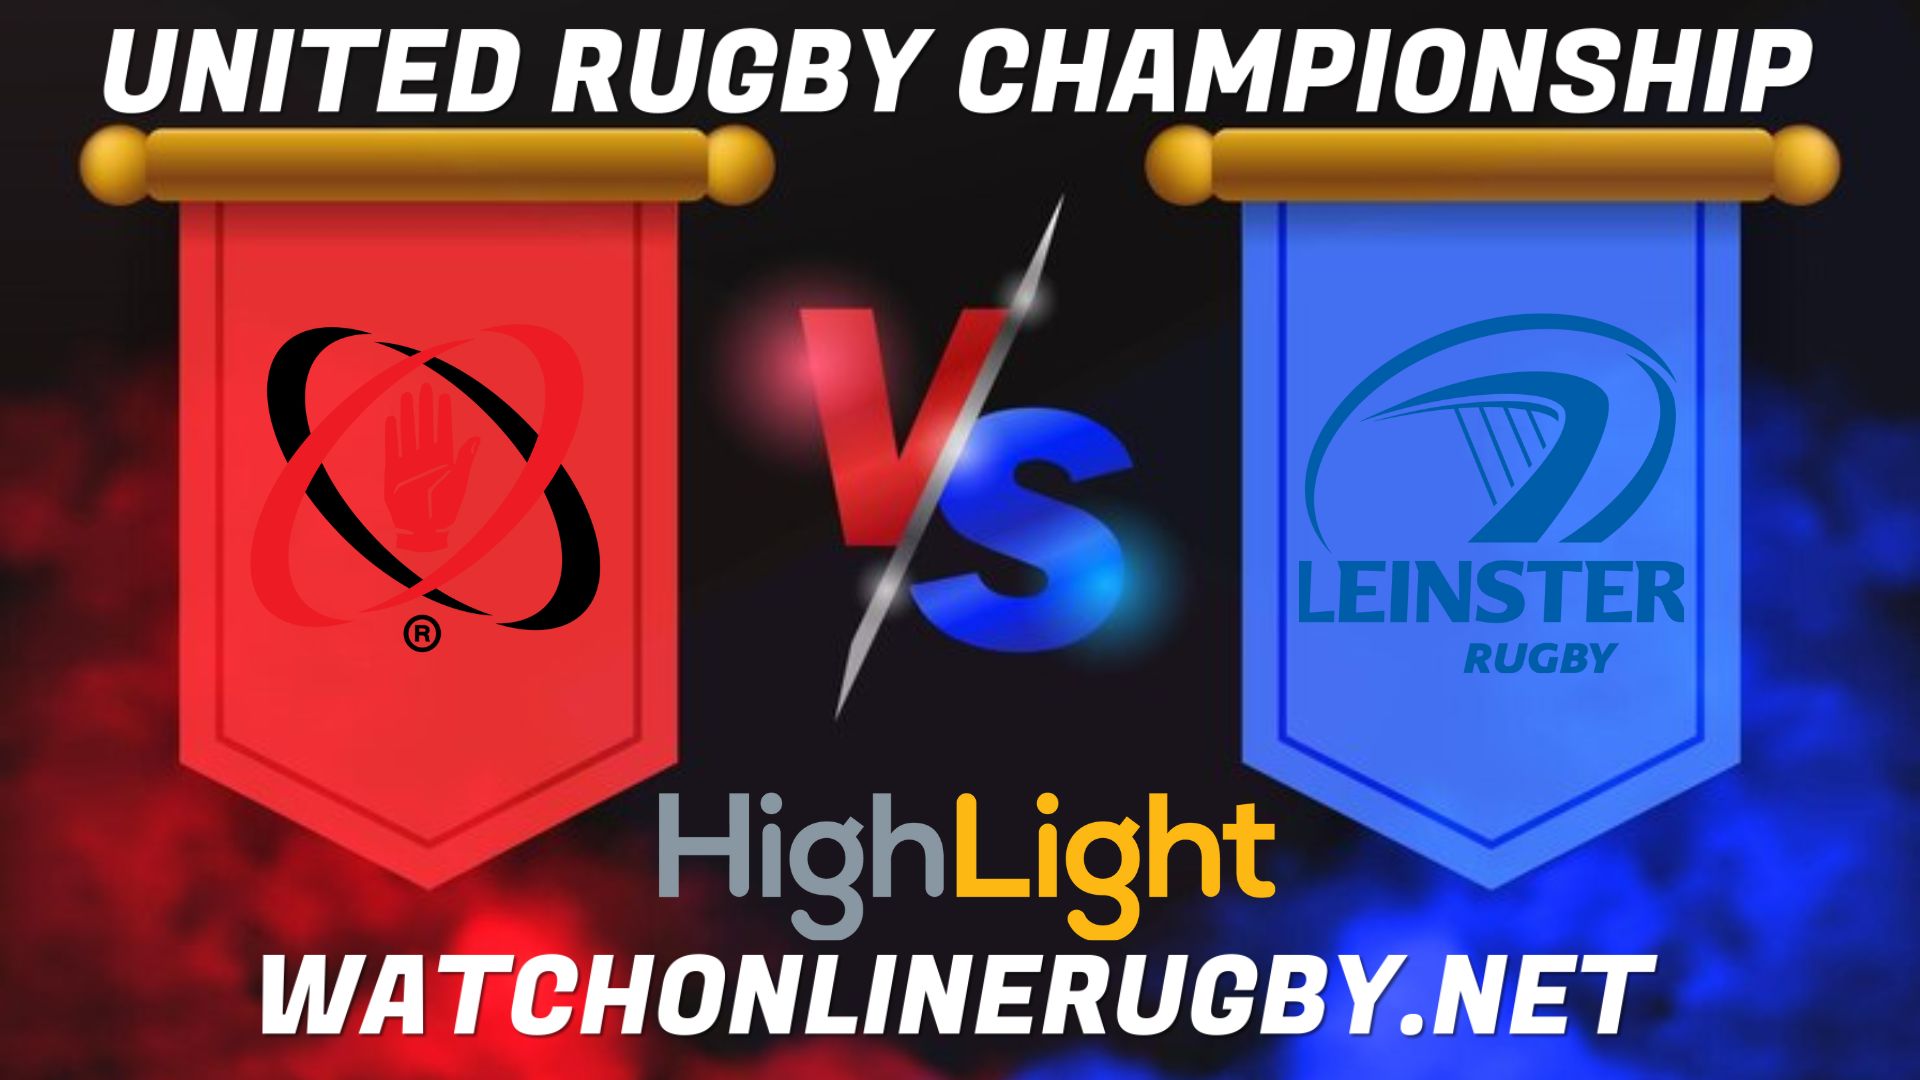 Ulster Vs Leinster United Rugby Championship 2022 RD 9